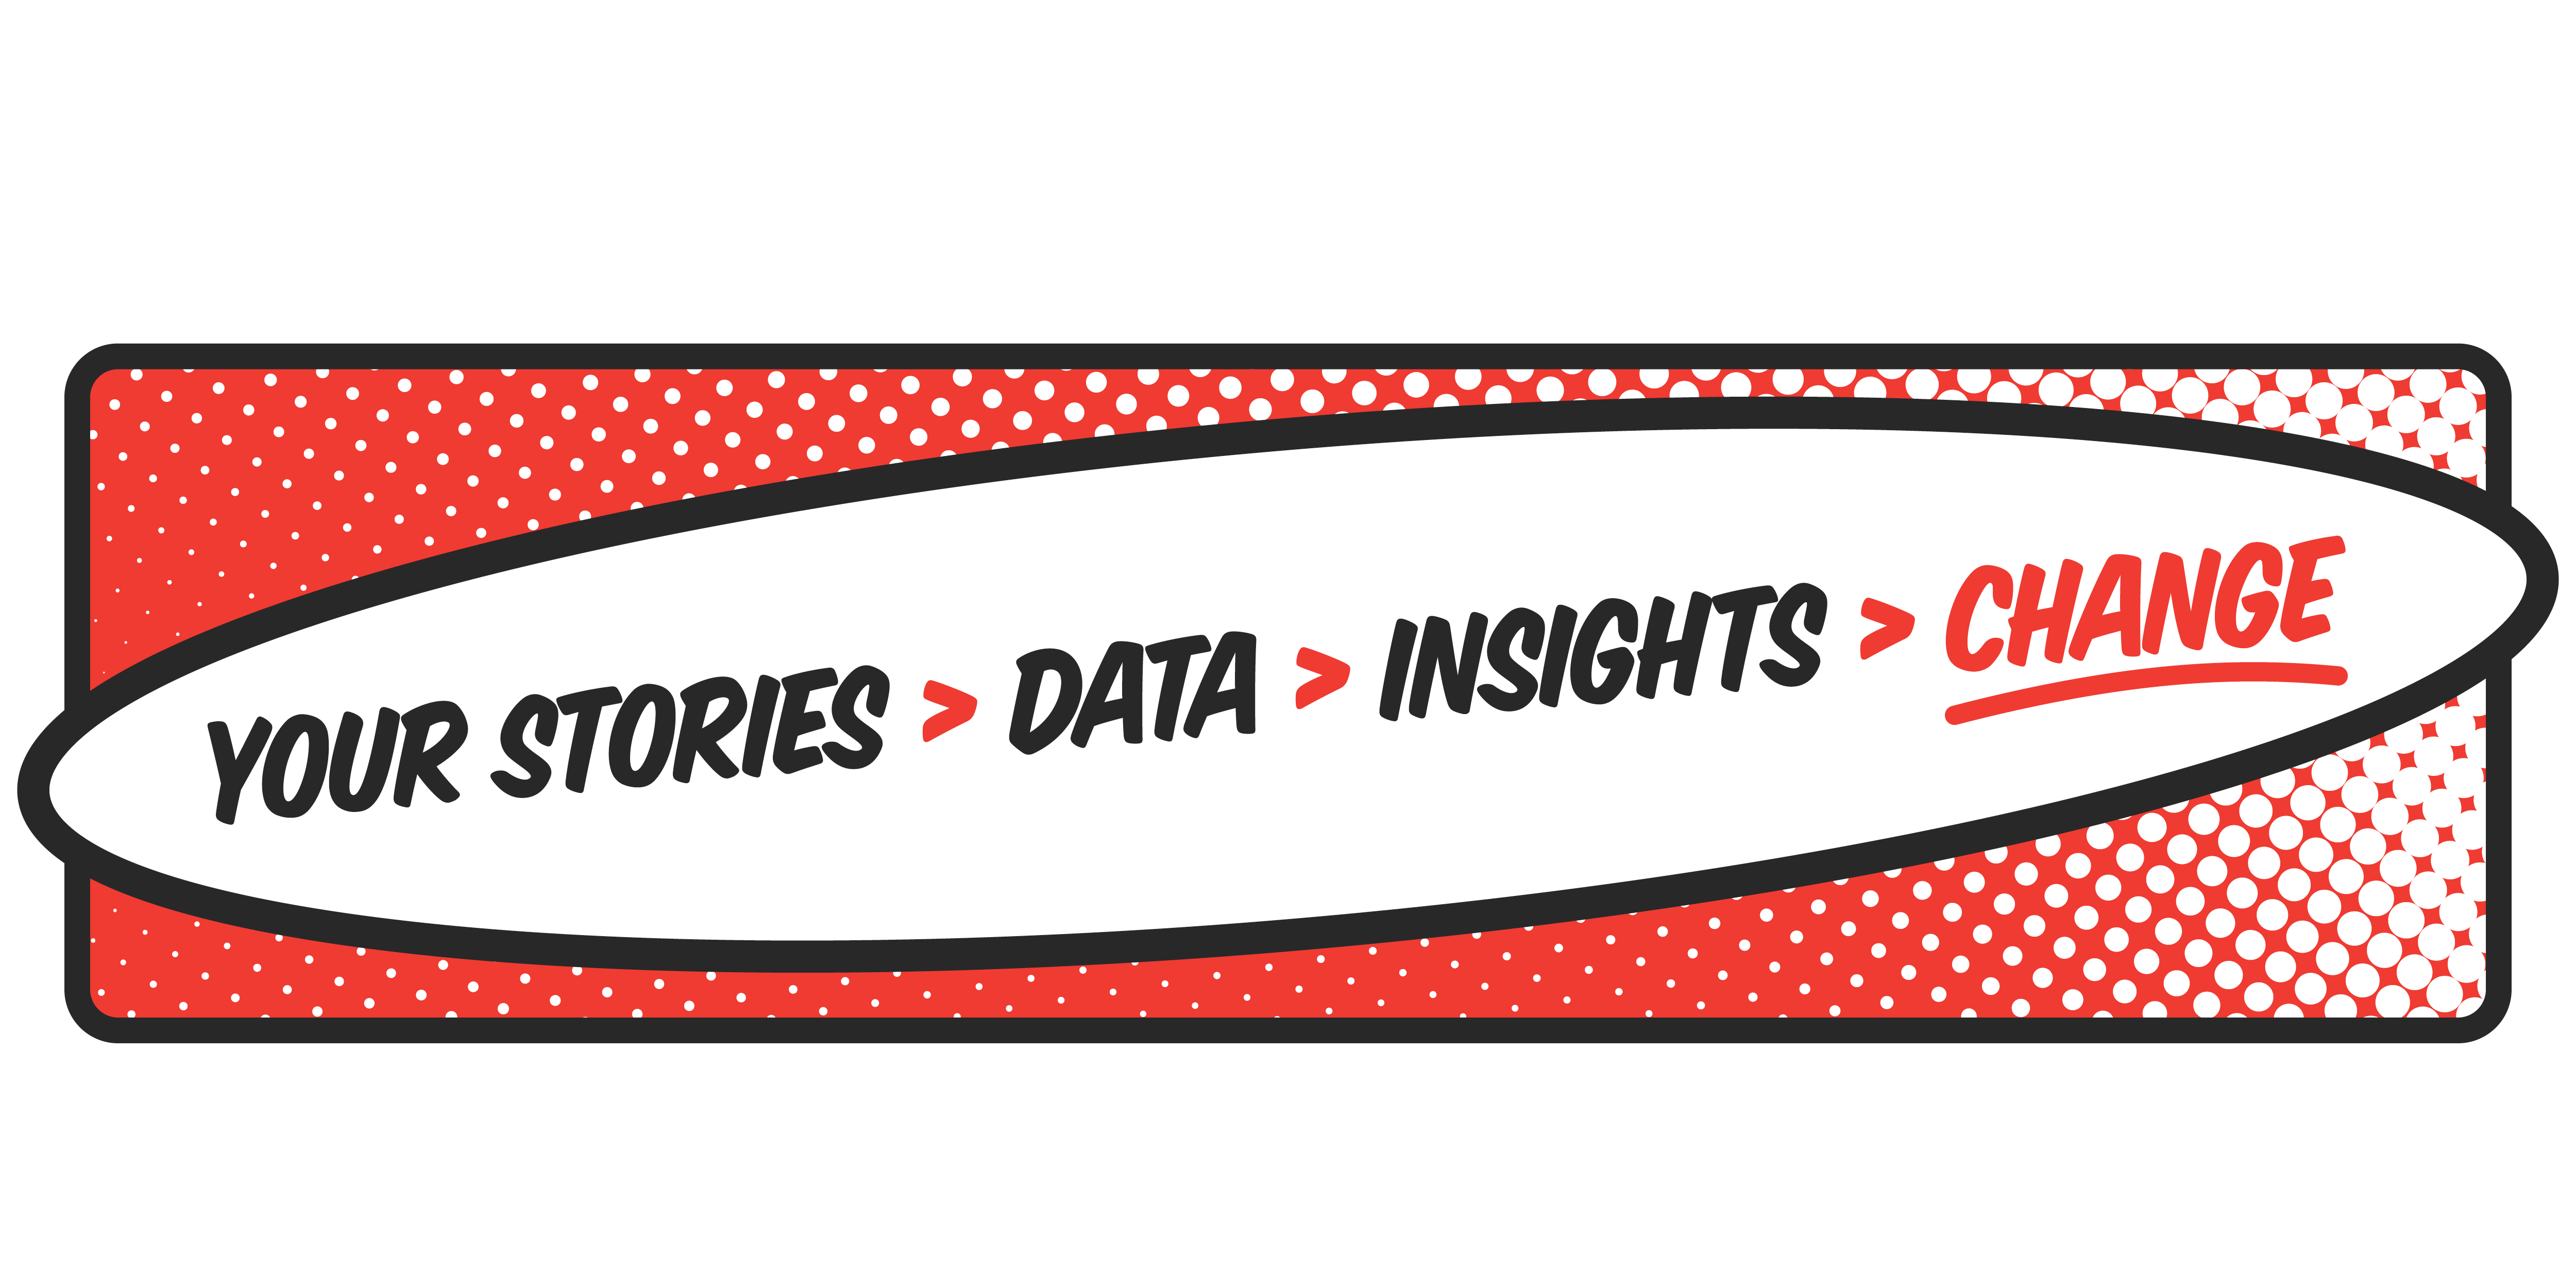 Your stories -> data -> insights -> change.